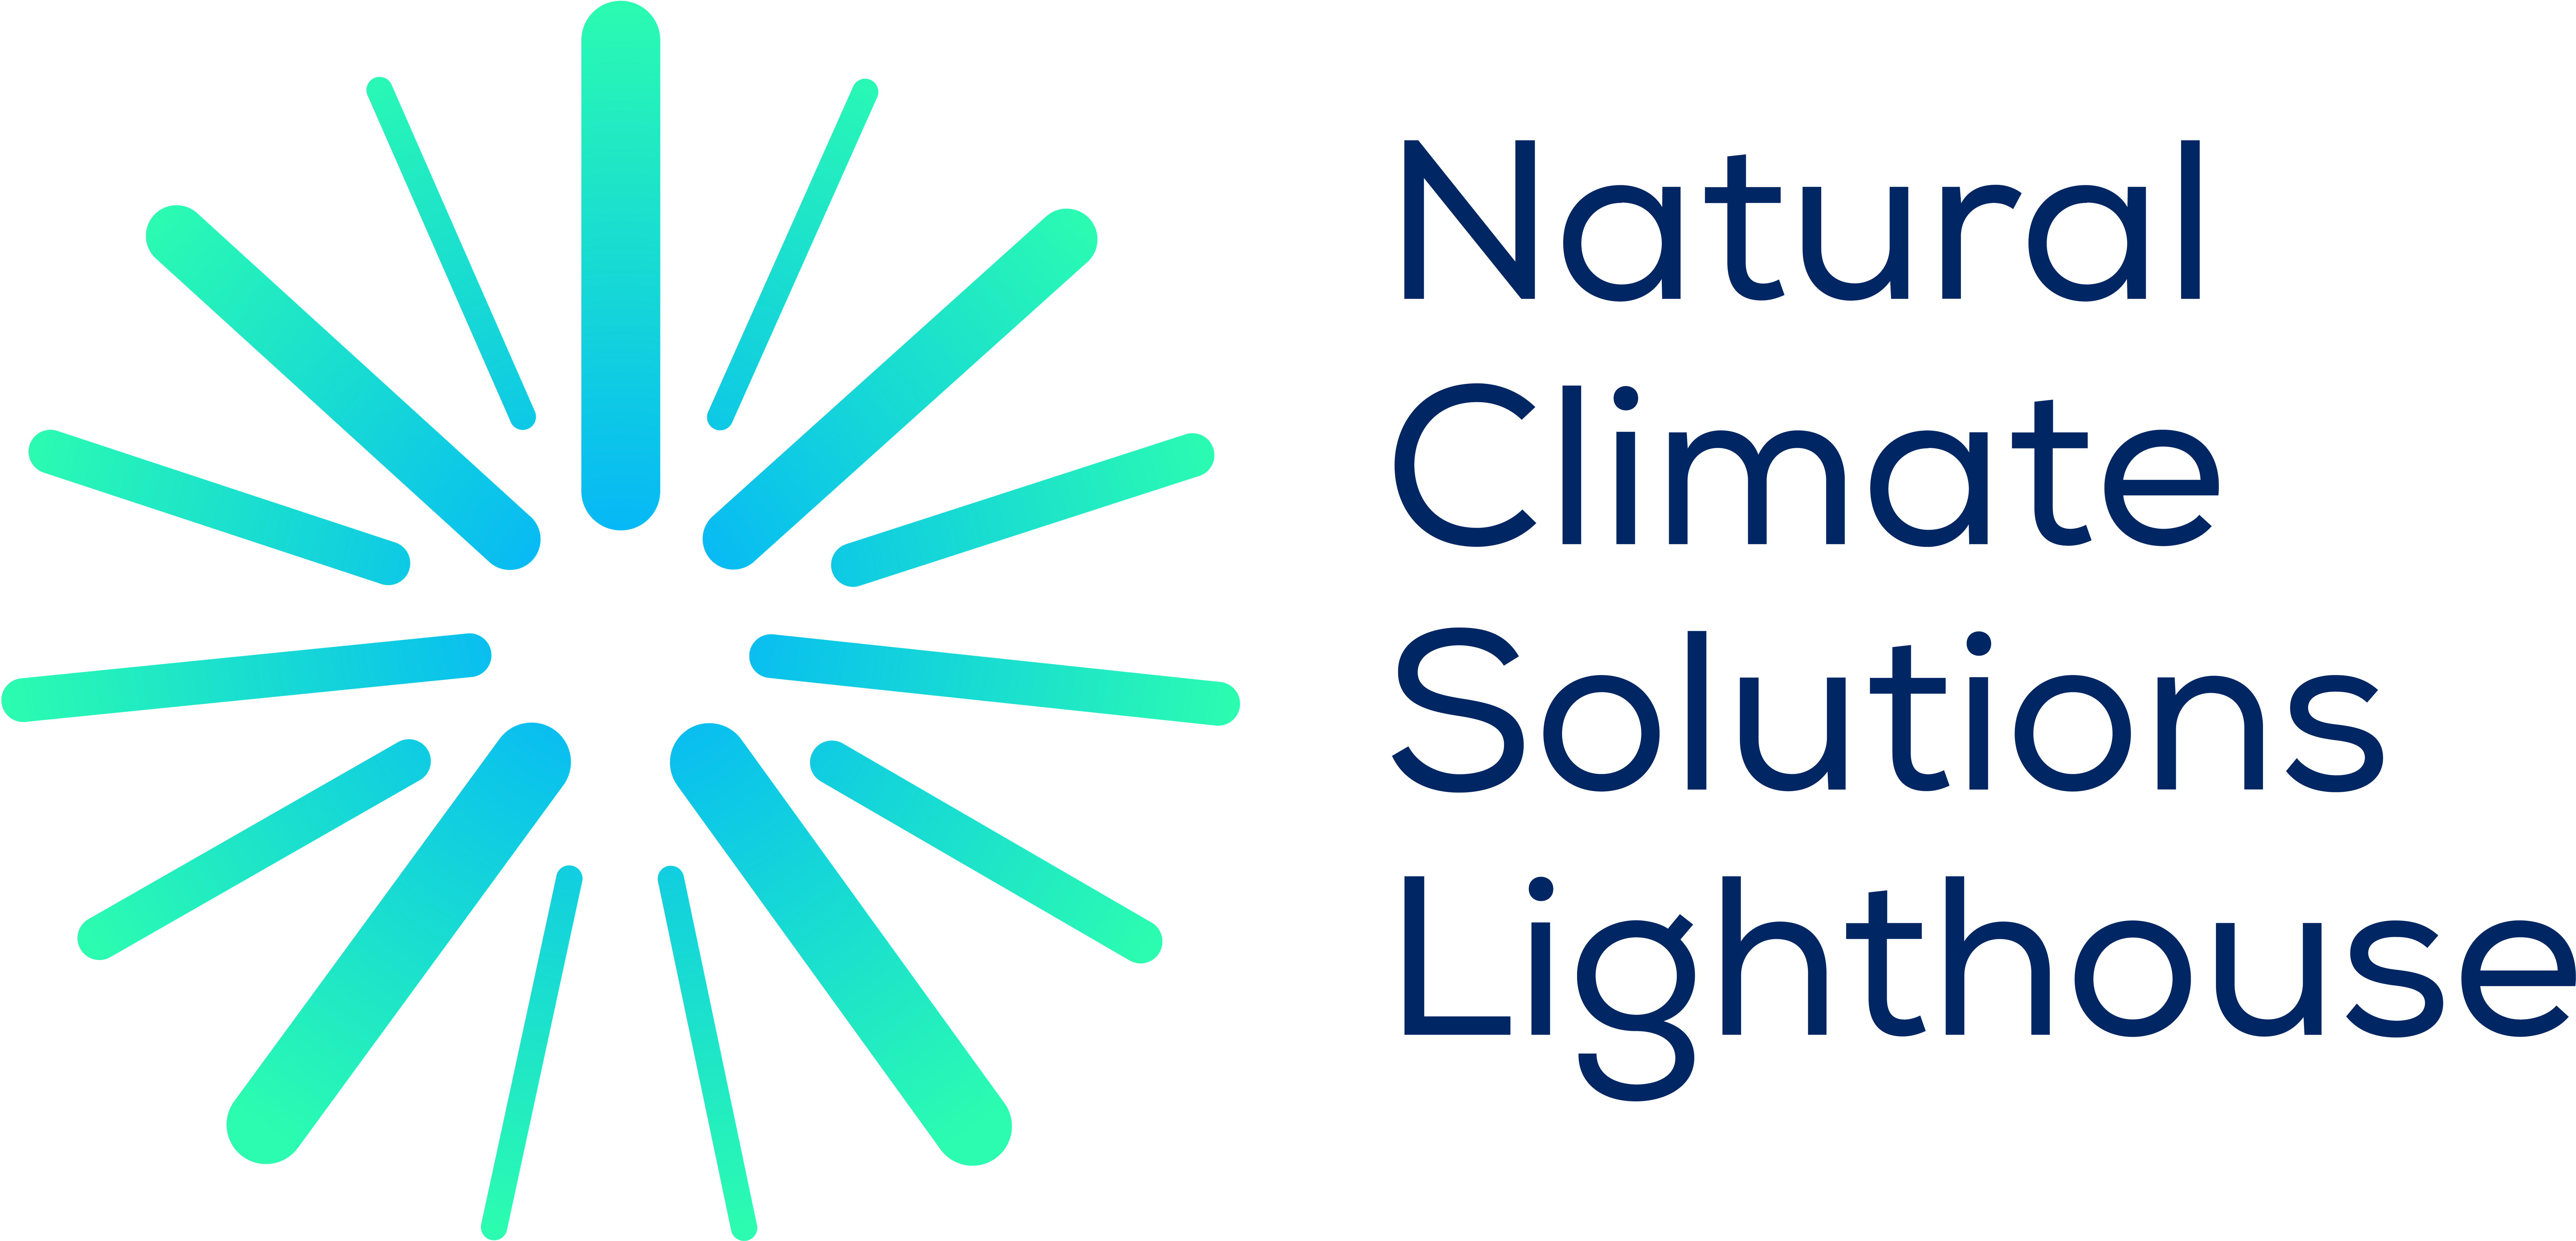 Conservation Coast, Nii Kaniti & Sumatra Merang Peatland Project earn recognition as Natural Climate Solutions Lighthouses